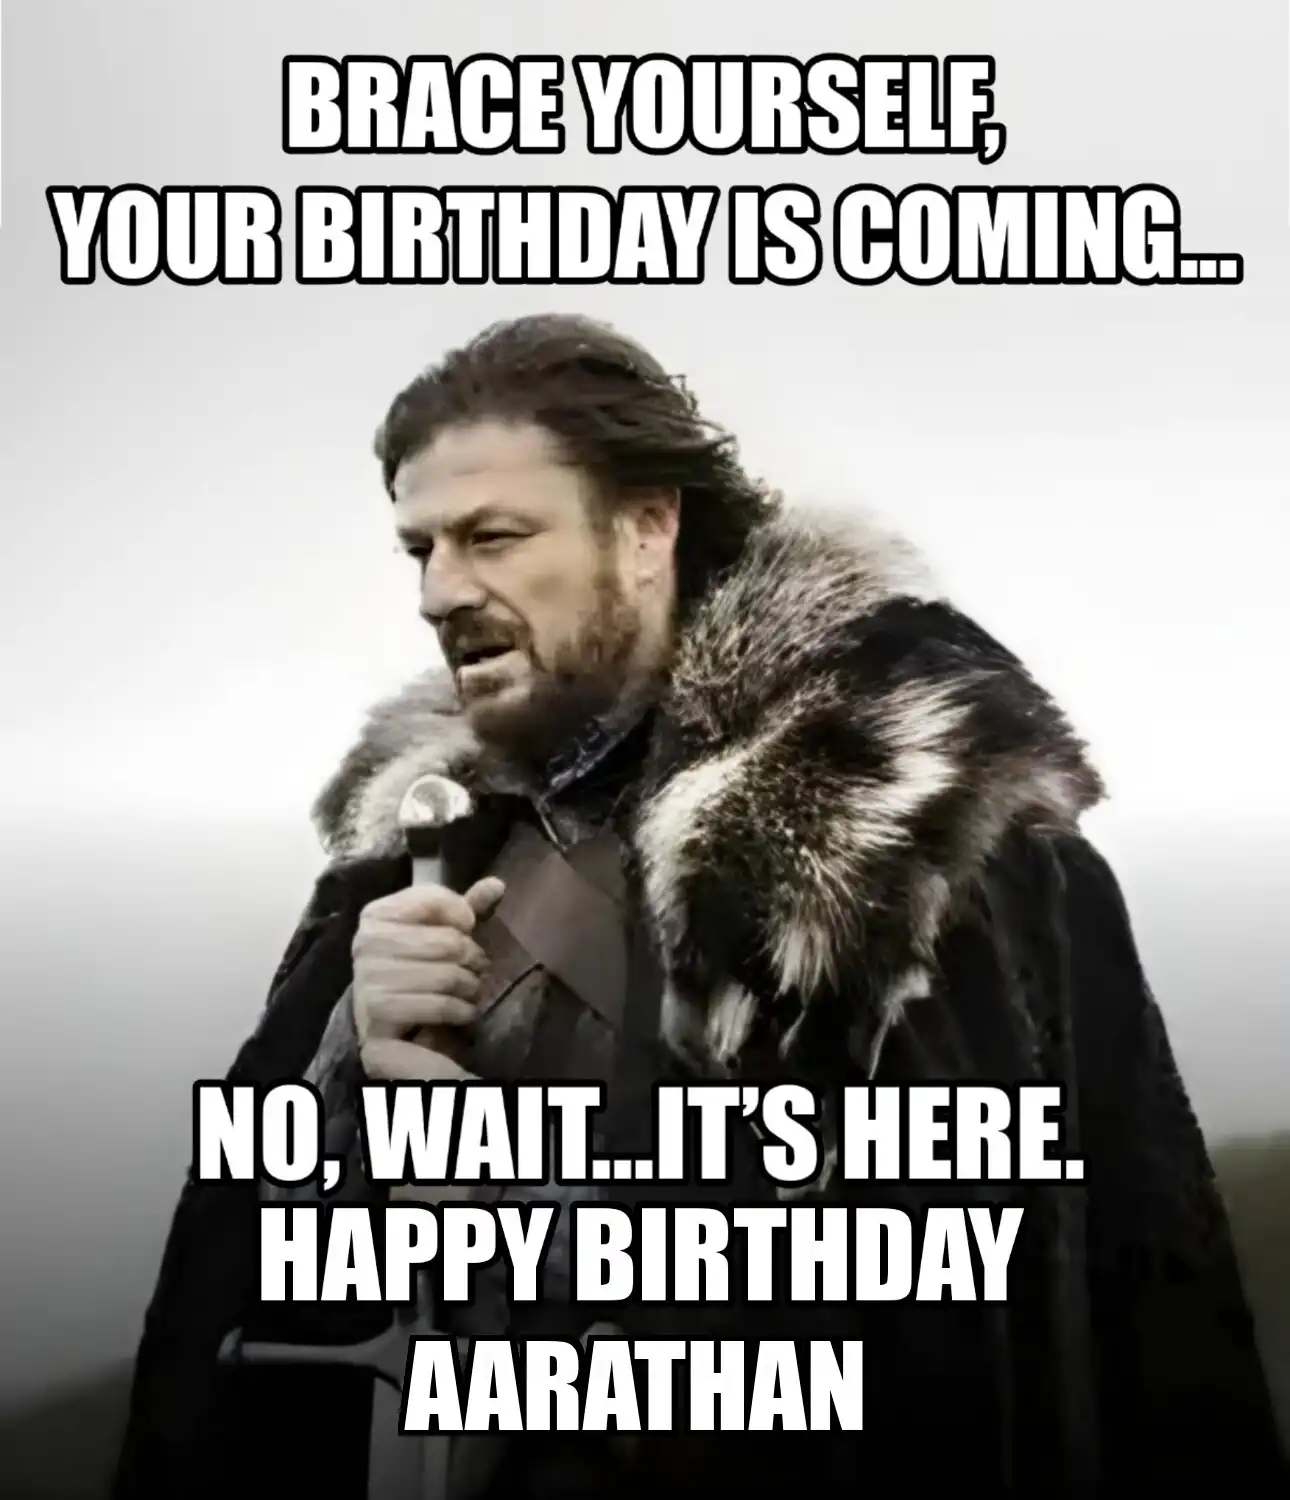 Happy Birthday Aarathan Brace Yourself Your Birthday Is Coming Meme